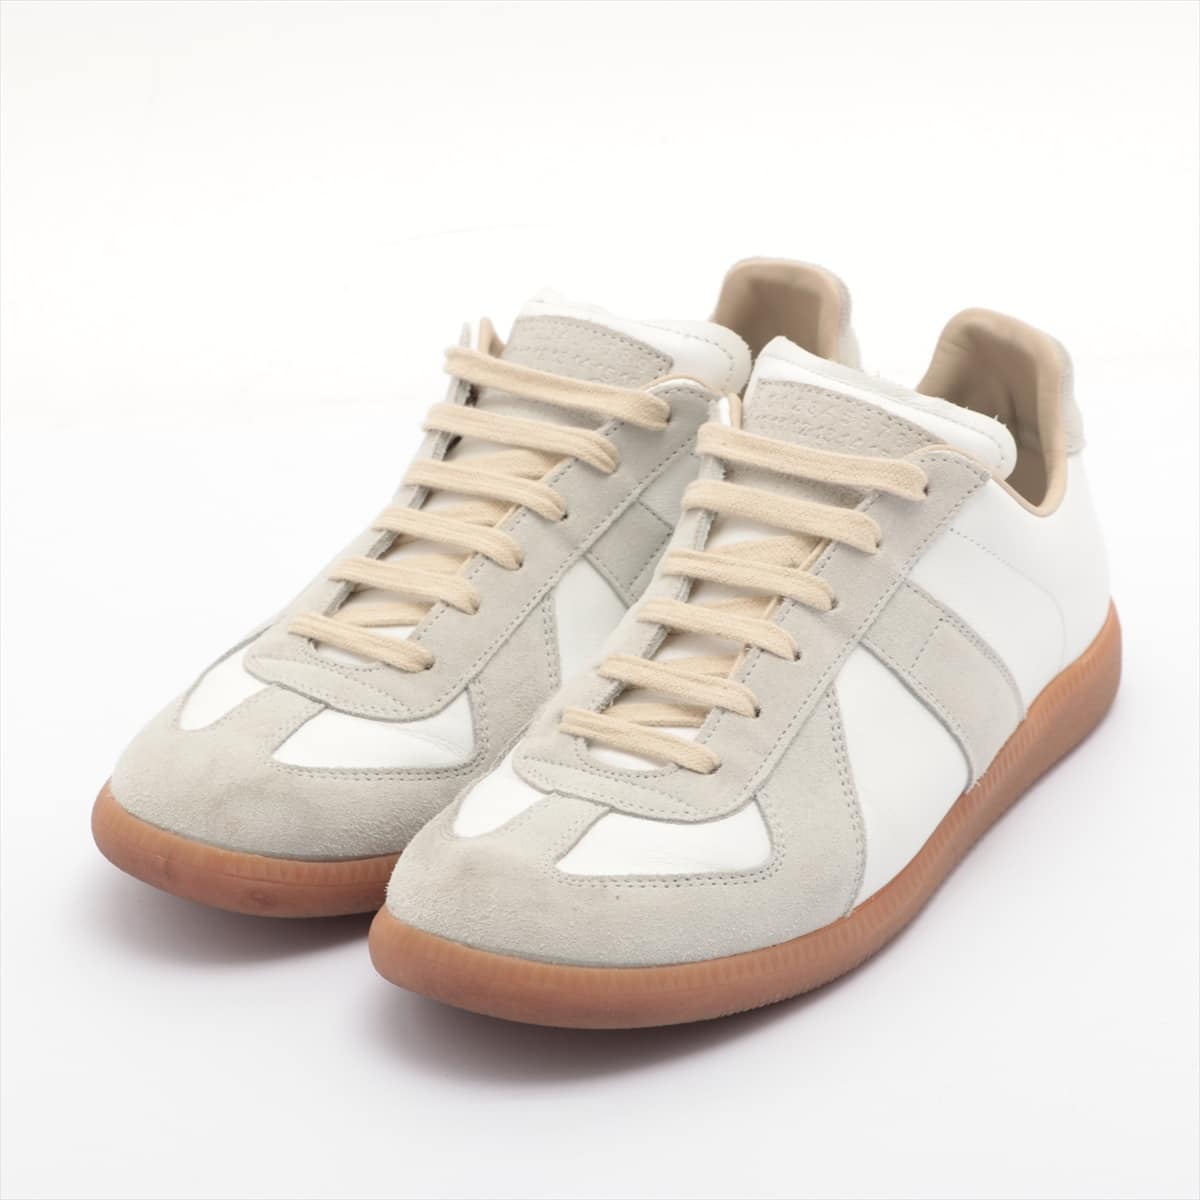 Maison Margiela 20 years Leather Sneakers 41 Men's White REPLICA German trainer S57WS0236